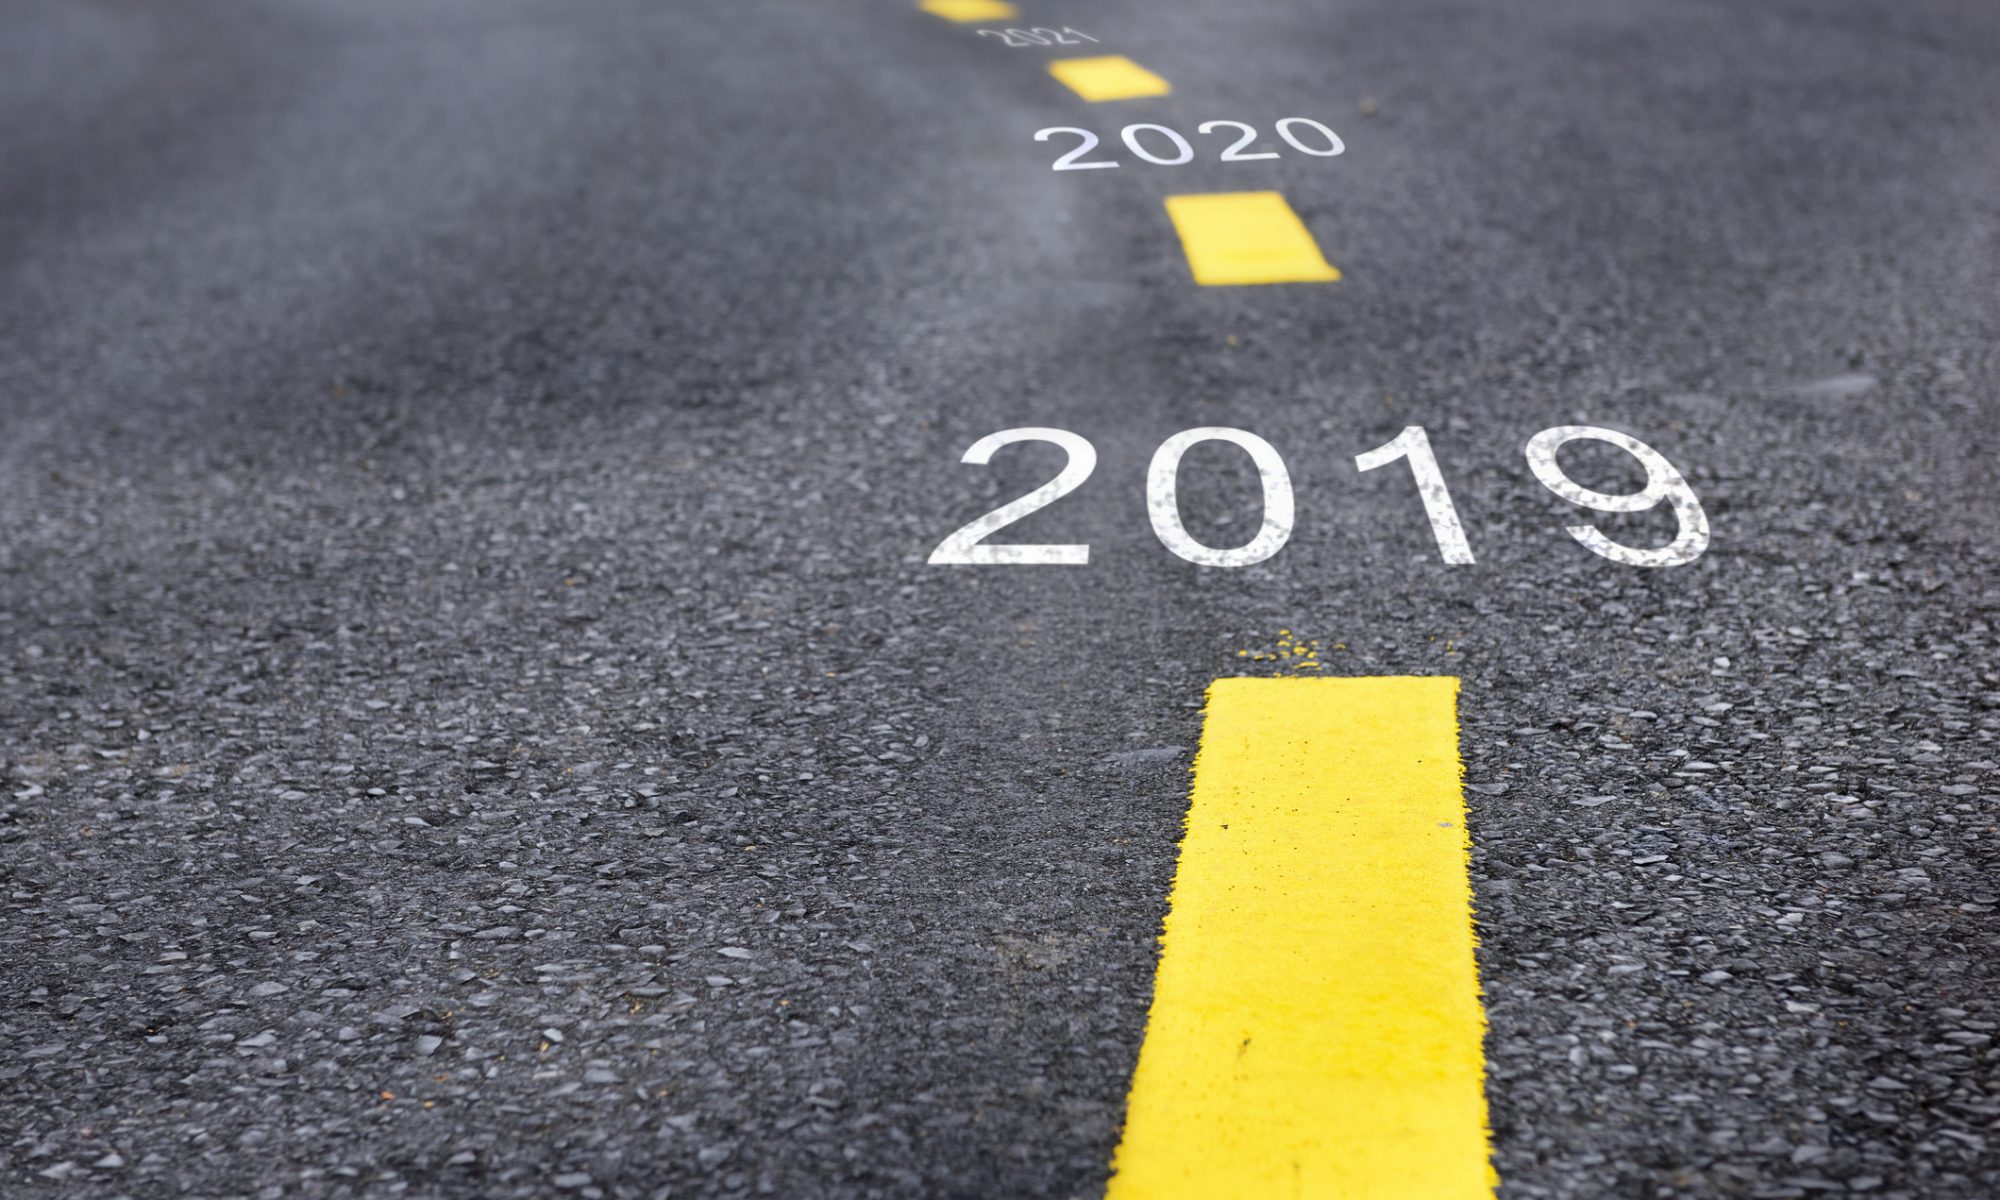 Cloud Predictions for 2019 and beyond